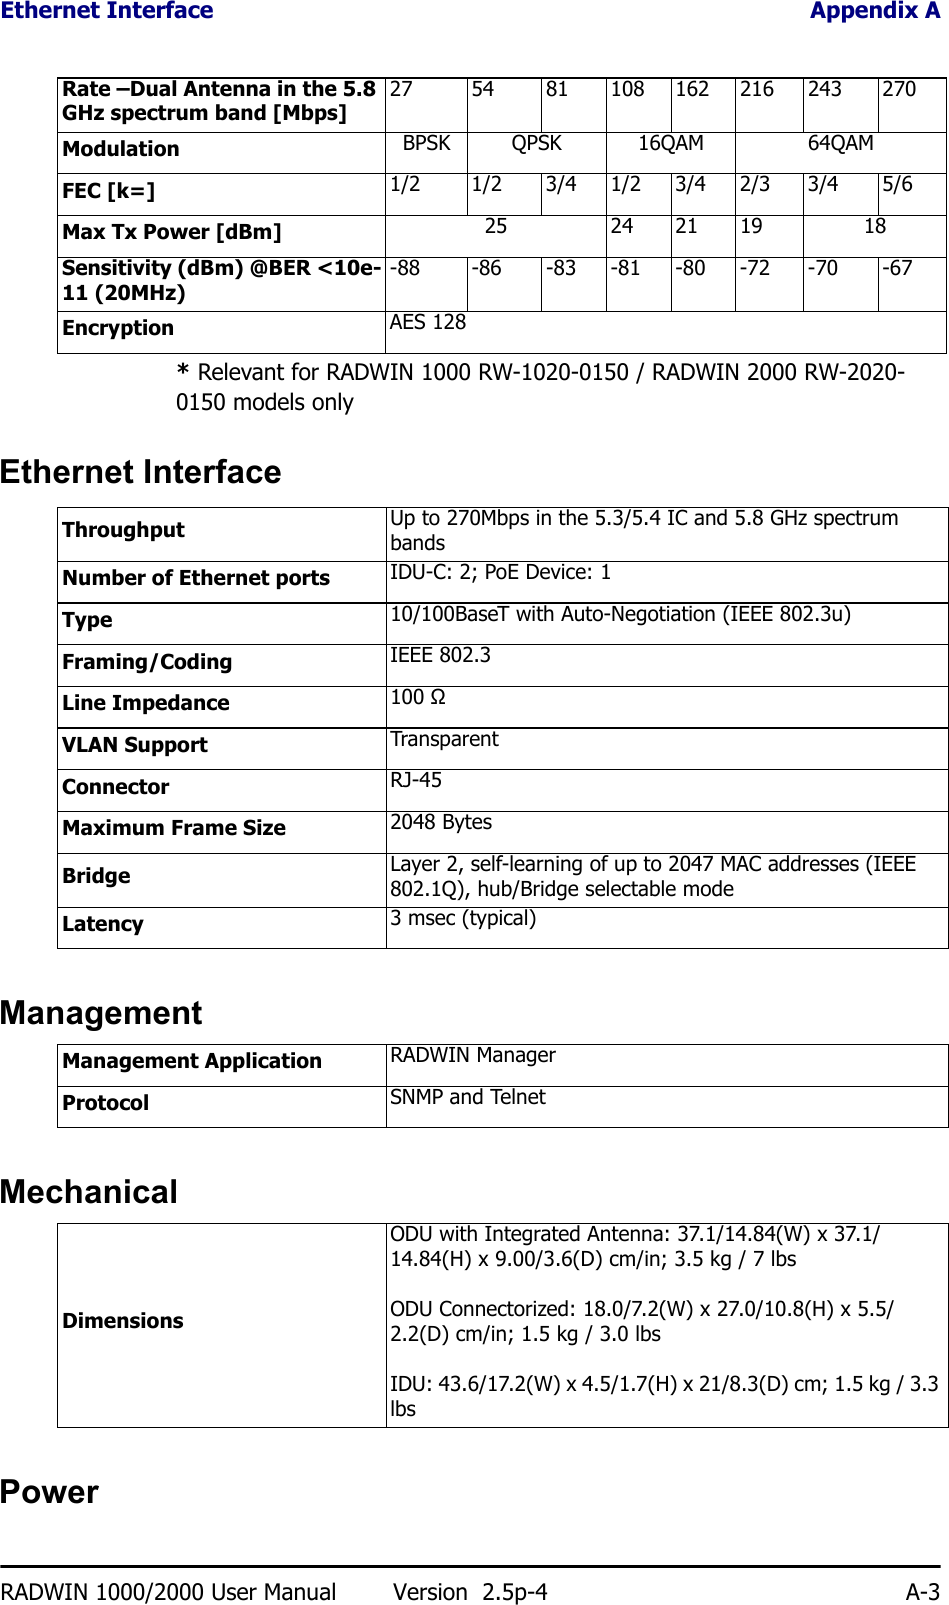 Ethernet Interface Appendix ARADWIN 1000/2000 User Manual Version  2.5p-4 A-3* Relevant for RADWIN 1000 RW-1020-0150 / RADWIN 2000 RW-2020-0150 models onlyEthernet InterfaceManagementMechanicalPowerRate –Dual Antenna in the 5.8 GHz spectrum band [Mbps]27 54 81 108 162 216 243 270Modulation BPSK QPSK 16QAM 64QAMFEC [k=] 1/2 1/2 3/4 1/2 3/4 2/3 3/4 5/6Max Tx Power [dBm] 25 24 21 19 18Sensitivity (dBm) @BER &lt;10e-11 (20MHz)-88 -86 -83 -81 -80 -72 -70 -67Encryption AES 128Throughput Up to 270Mbps in the 5.3/5.4 IC and 5.8 GHz spectrum bandsNumber of Ethernet ports IDU-C: 2; PoE Device: 1Type 10/100BaseT with Auto-Negotiation (IEEE 802.3u)Framing/Coding IEEE 802.3Line Impedance 100 ΩVLAN Support TransparentConnector RJ-45Maximum Frame Size 2048 BytesBridge Layer 2, self-learning of up to 2047 MAC addresses (IEEE 802.1Q), hub/Bridge selectable modeLatency 3 msec (typical)Management Application RADWIN ManagerProtocol SNMP and TelnetDimensionsODU with Integrated Antenna: 37.1/14.84(W) x 37.1/14.84(H) x 9.00/3.6(D) cm/in; 3.5 kg / 7 lbsODU Connectorized: 18.0/7.2(W) x 27.0/10.8(H) x 5.5/2.2(D) cm/in; 1.5 kg / 3.0 lbsIDU: 43.6/17.2(W) x 4.5/1.7(H) x 21/8.3(D) cm; 1.5 kg / 3.3 lbs